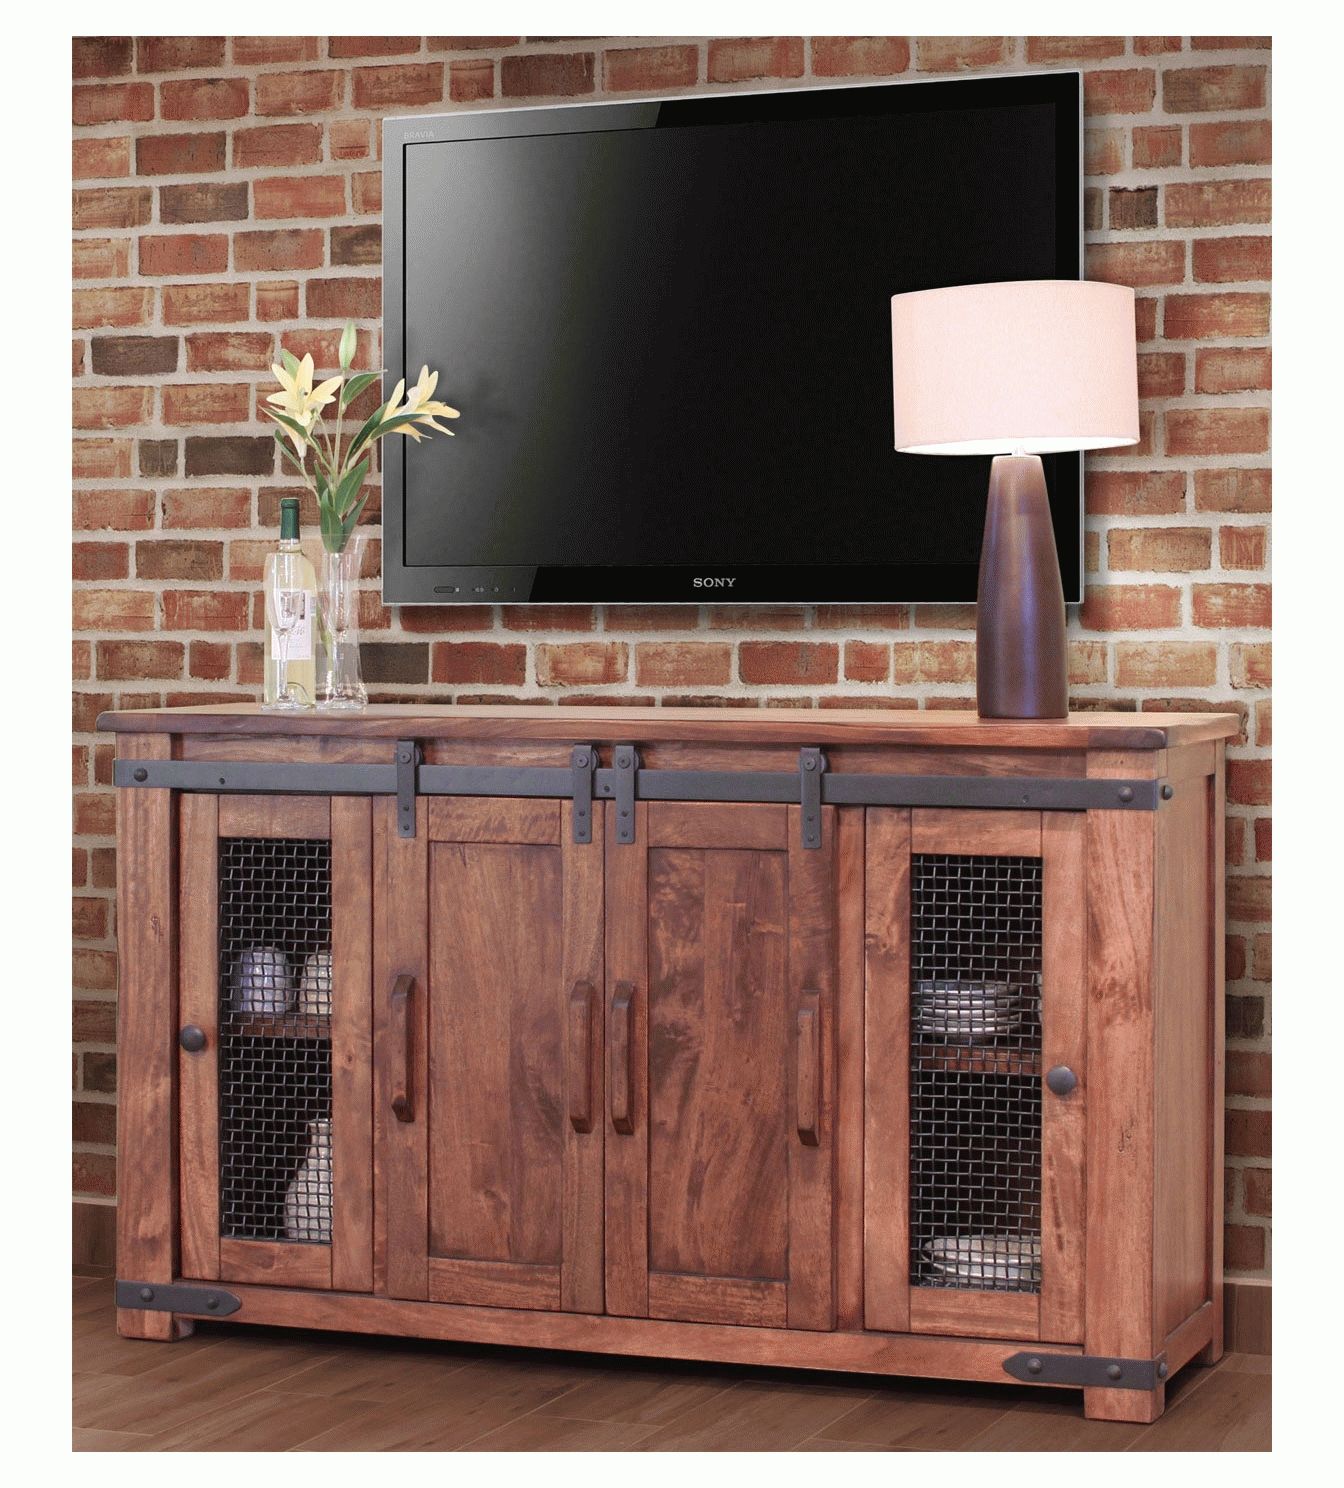 Rustic Barn Door Tv Stand, Barn Door Tv Stand, Barn Door Tv Console With Regard To Cheap Rustic Tv Stands (Photo 2 of 15)